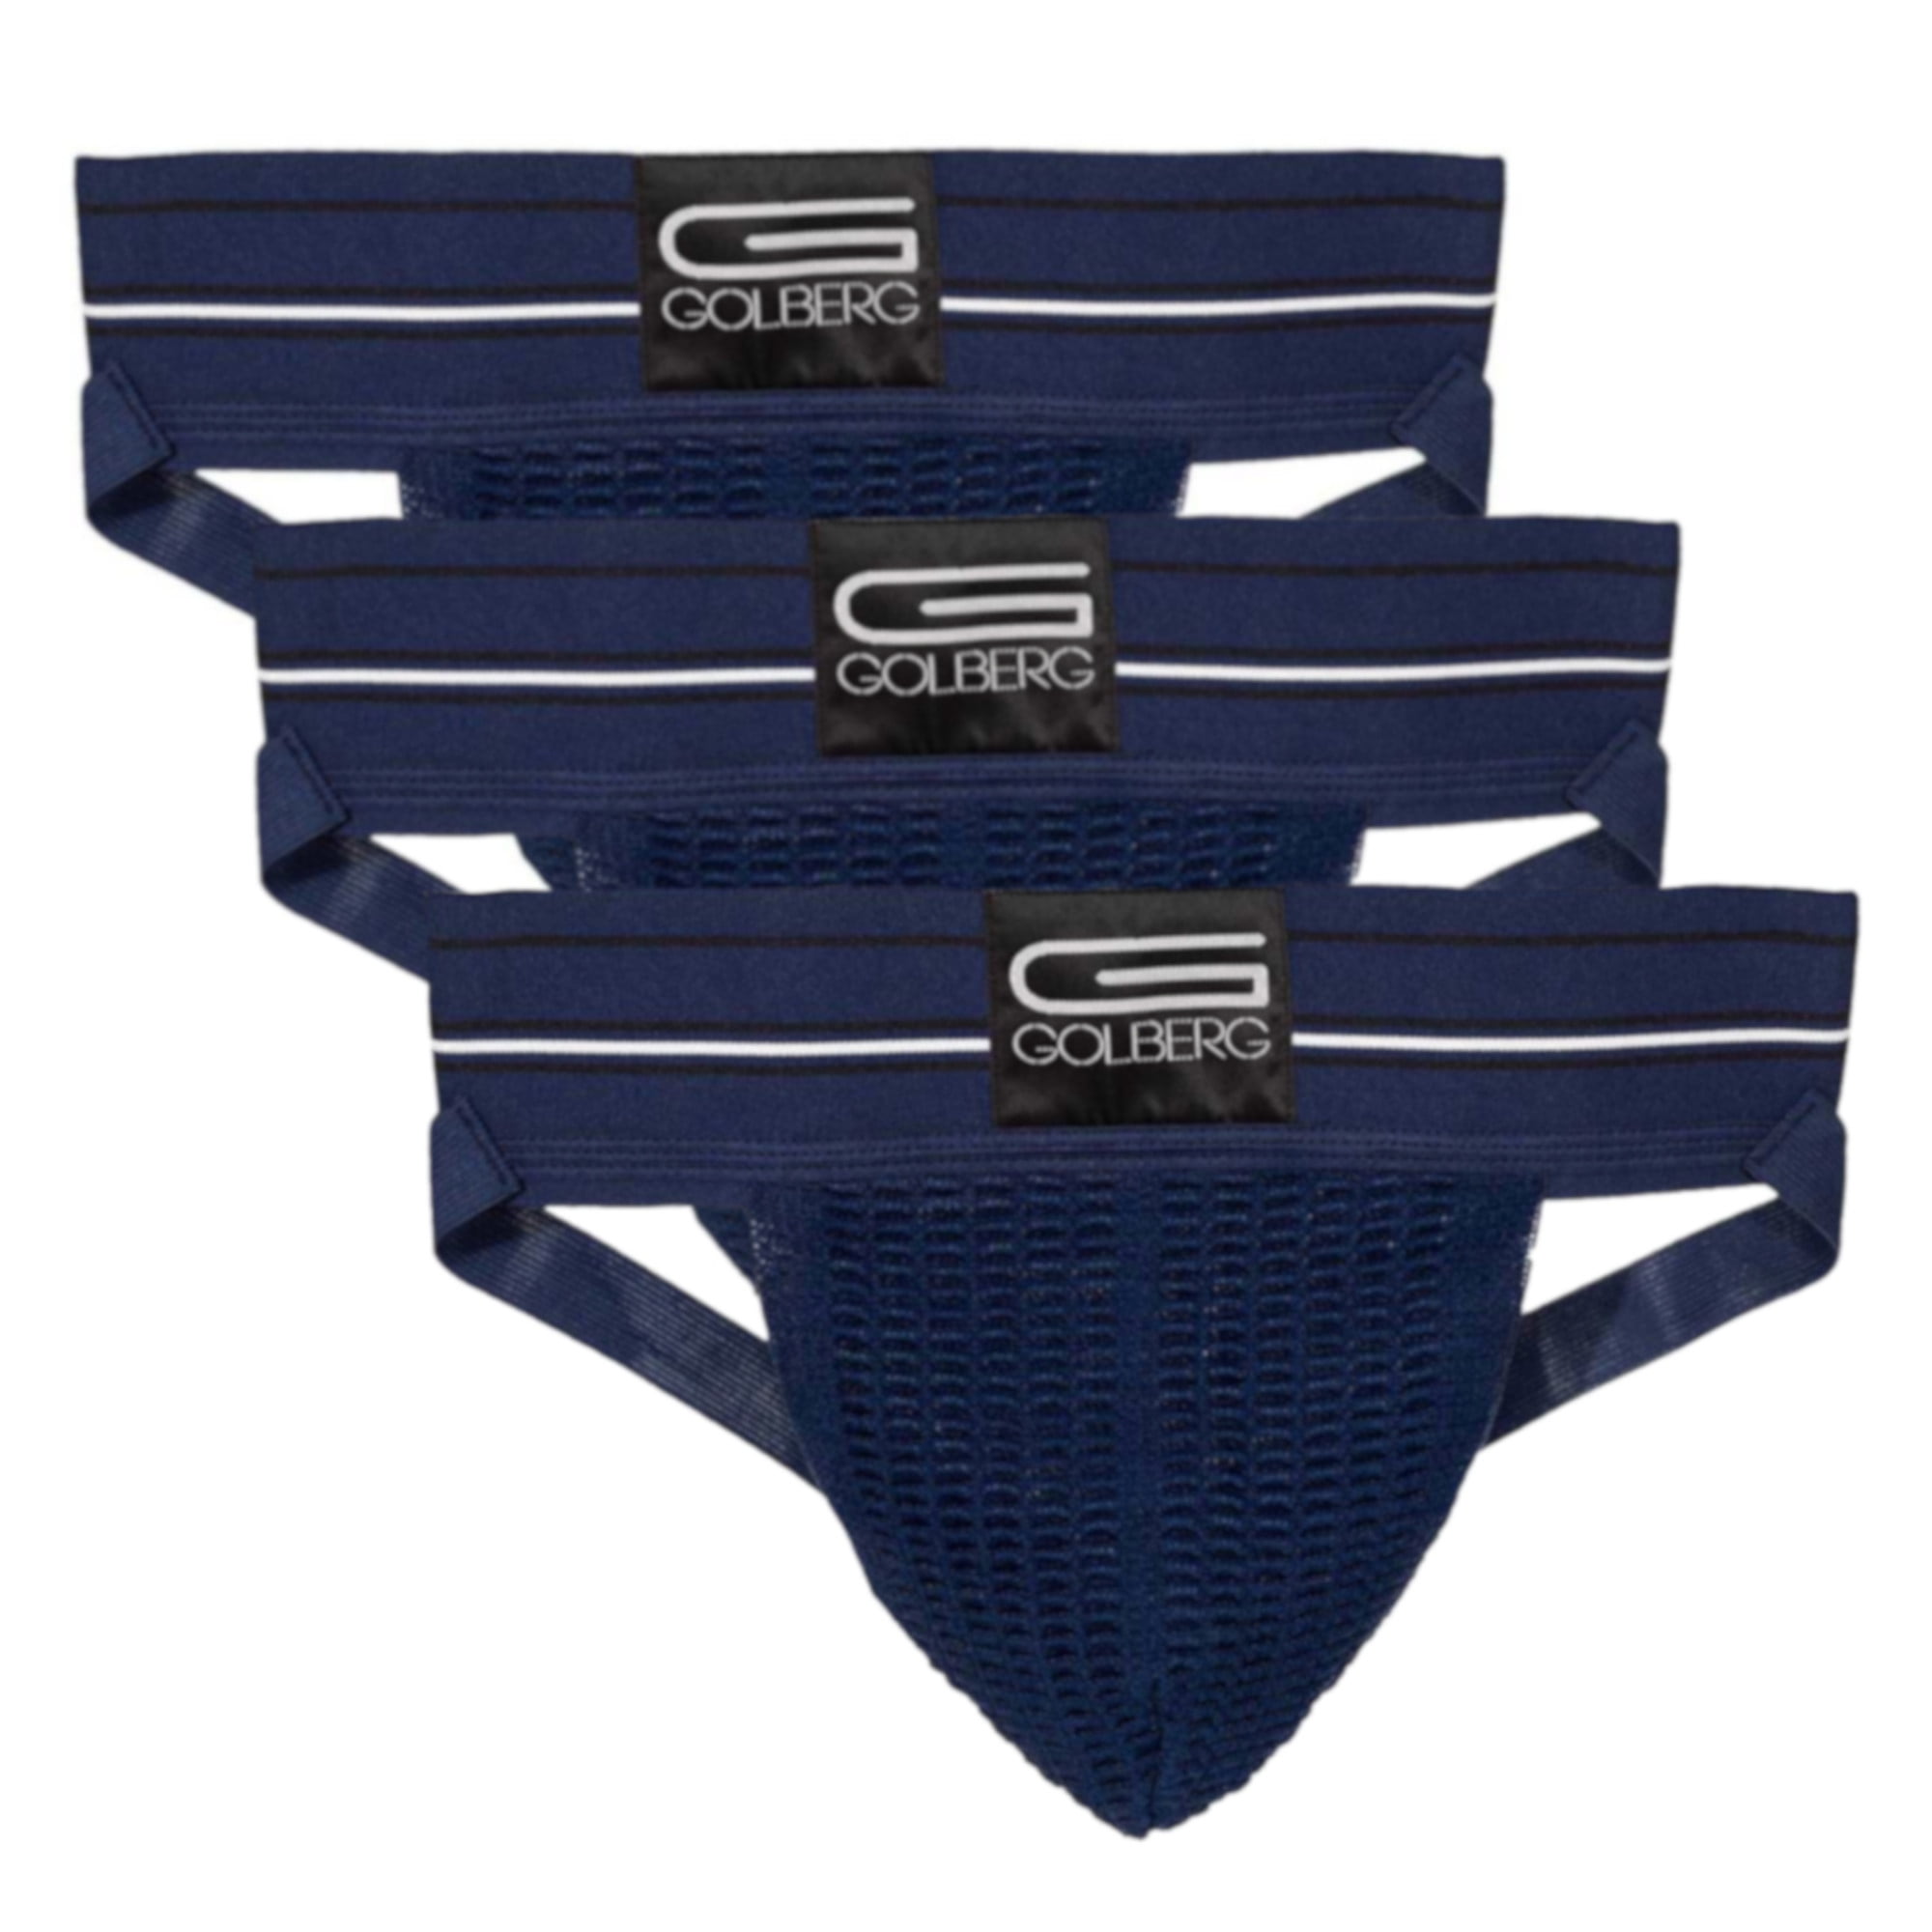 Golberg Premium Men's Athletic Supporters - 3 Pack Jock Strap Underwear  with Contoured Waistband - Multiple Sizes and Colors (Size - XX Large) 